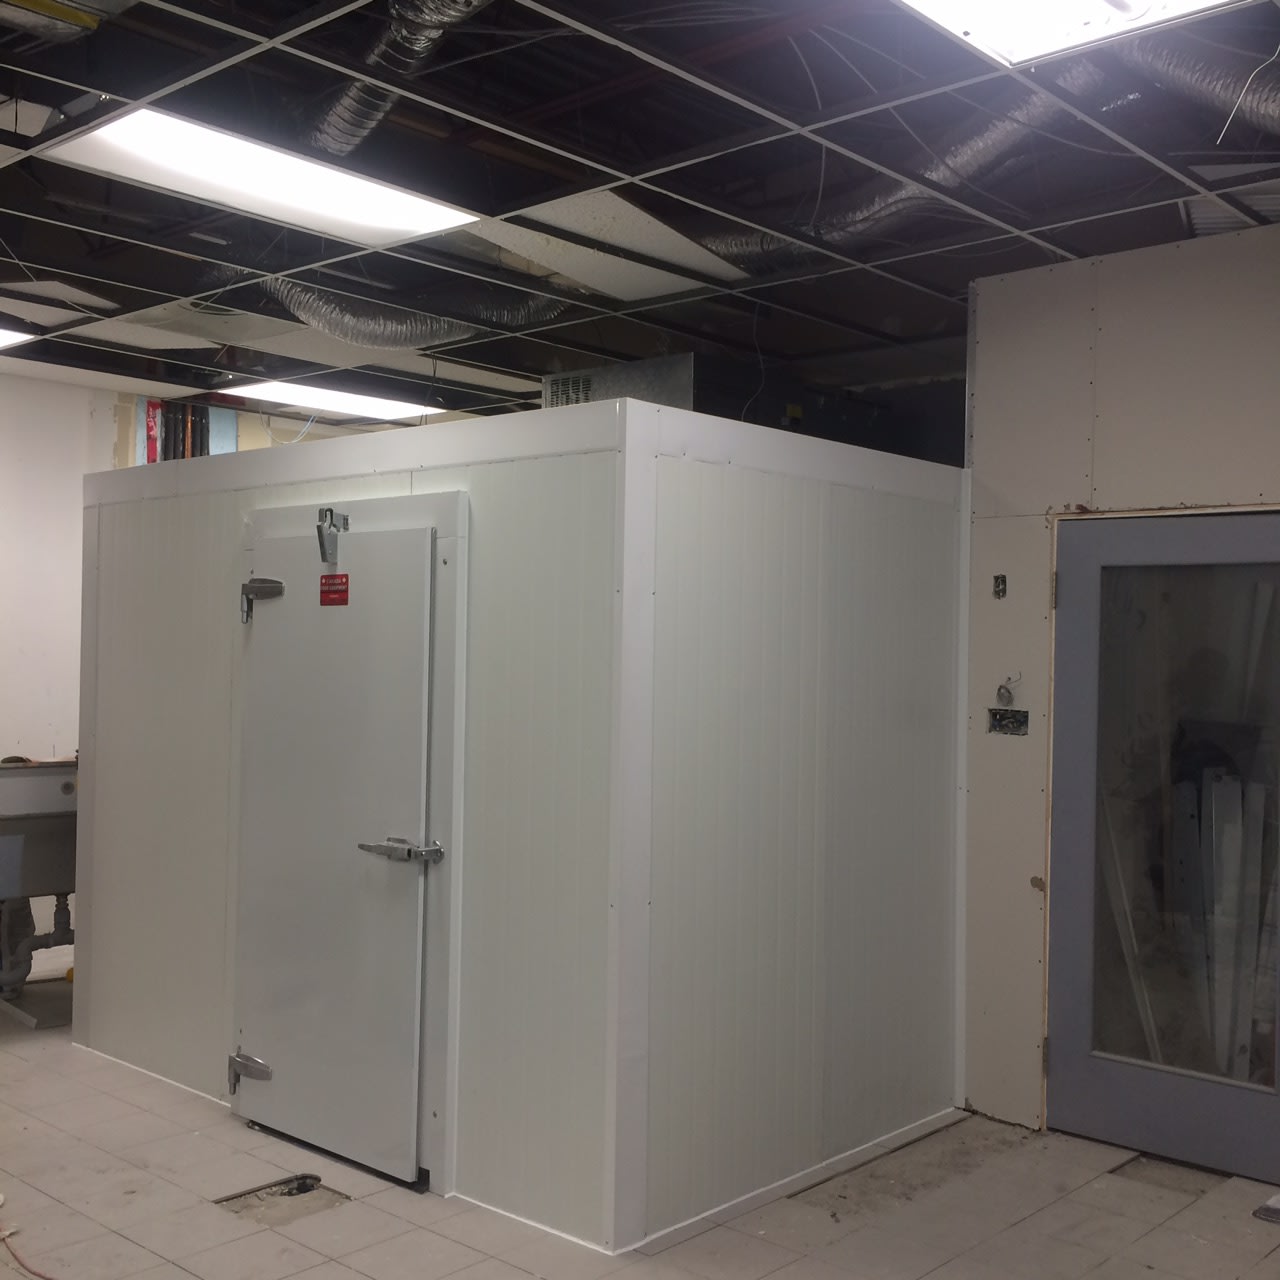 10x10x8H Walk-In Freezer - Used Self Contained System (NEW SD) - F10108SDUSC